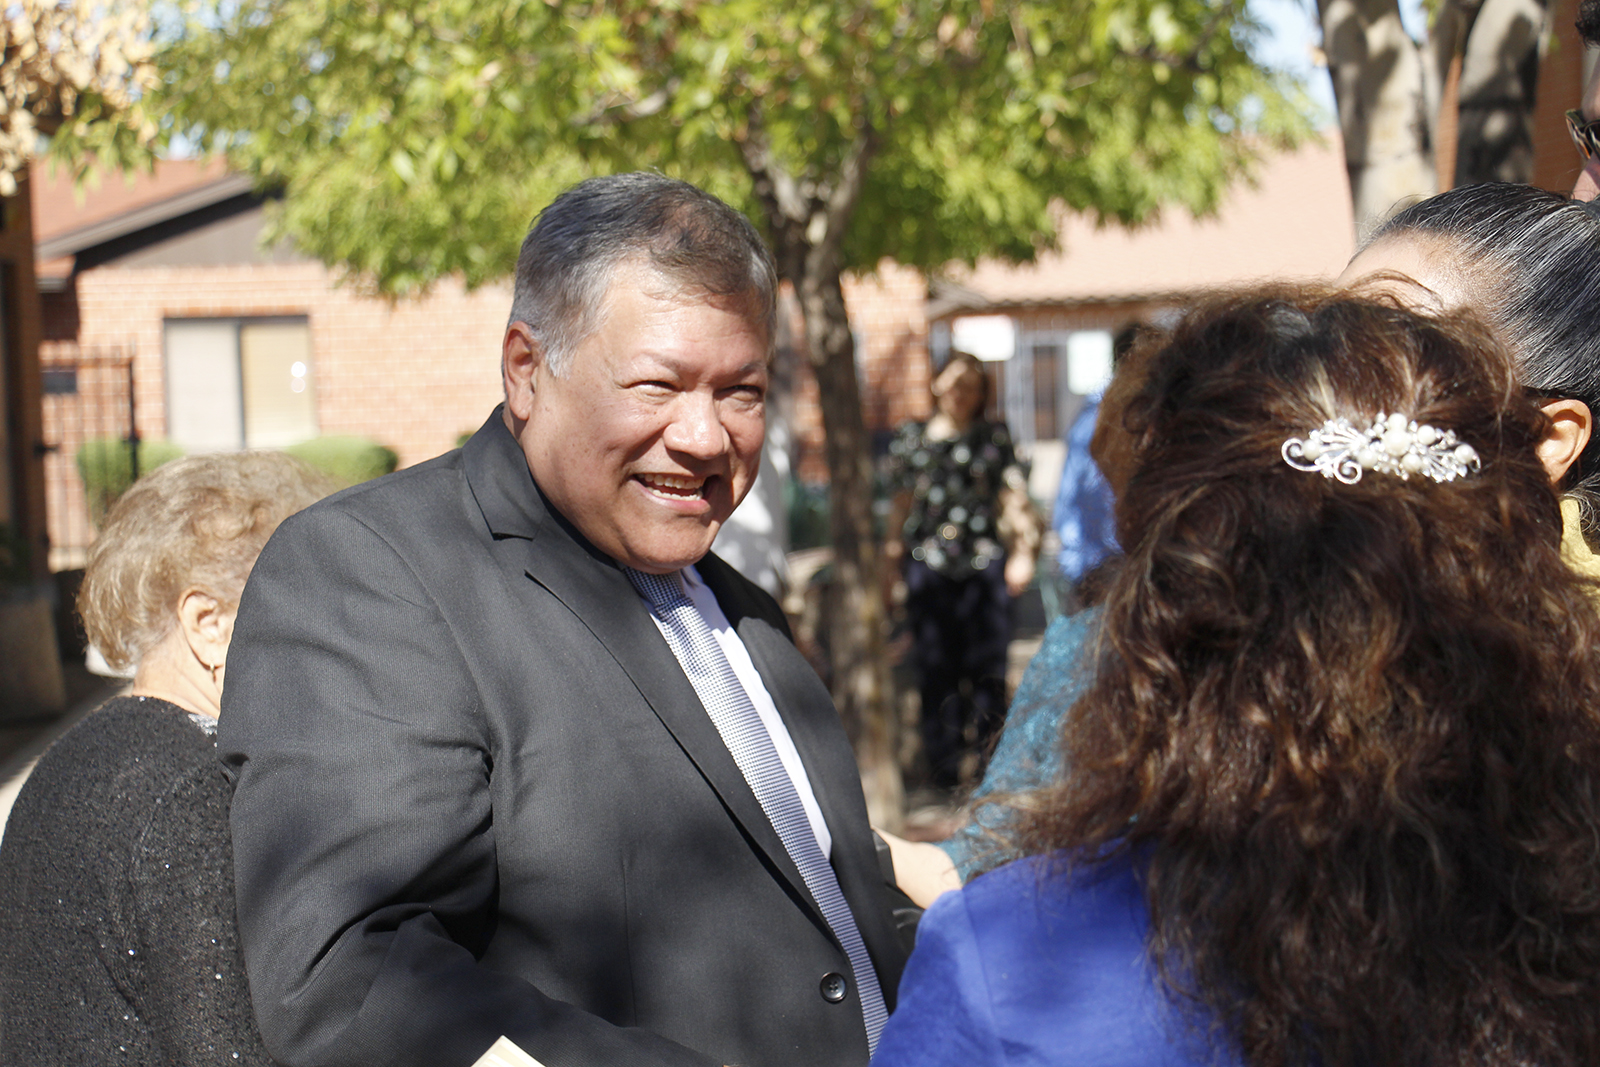 Dcn. Marvin Silva greets well-wishers following his ordination to the permanent diaconte Nov. 5 outside of Ss. Simon and Jude Cathedral. Dcn. Silva will be serving at St. Mary Parish in Chandler. (Ambria Hammel/CATHOLIC SUN)